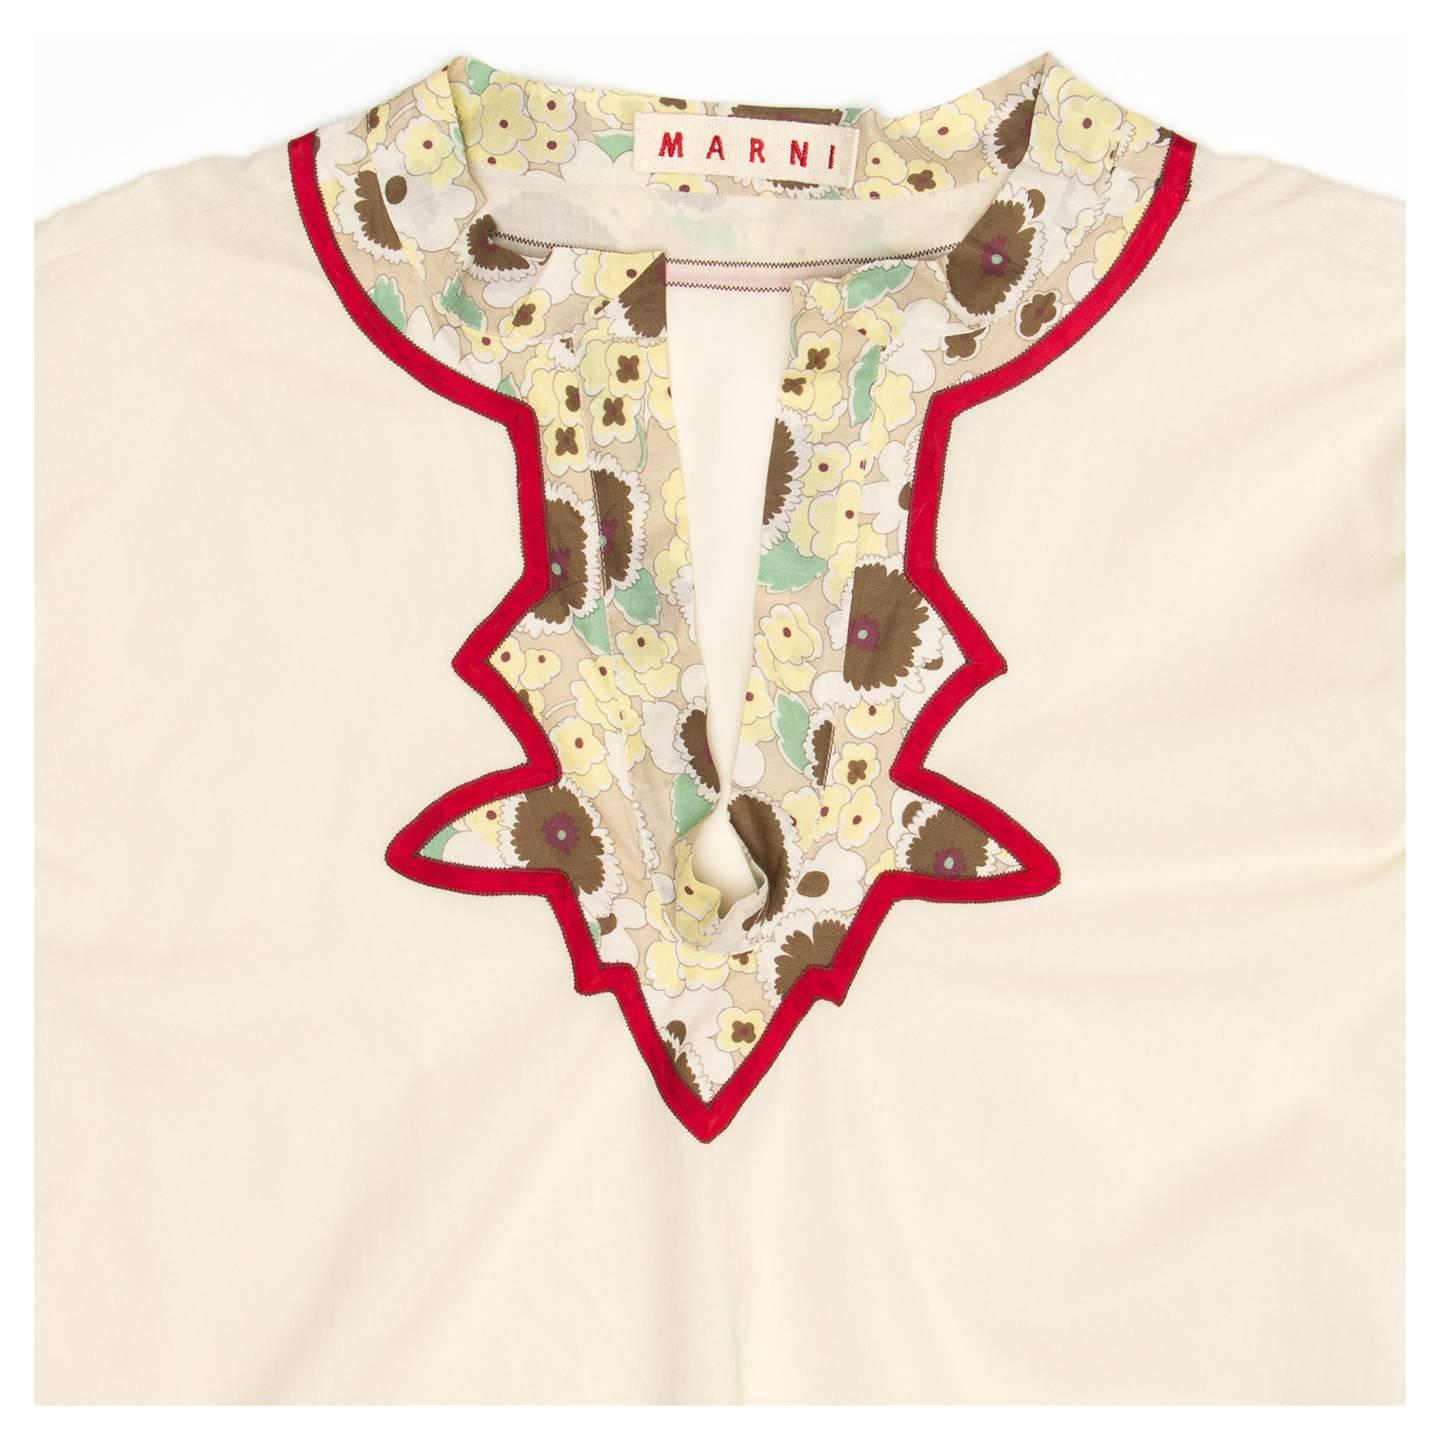 Marni Multicolor Floral Print Cotton Tunic In New Condition For Sale In Brooklyn, NY